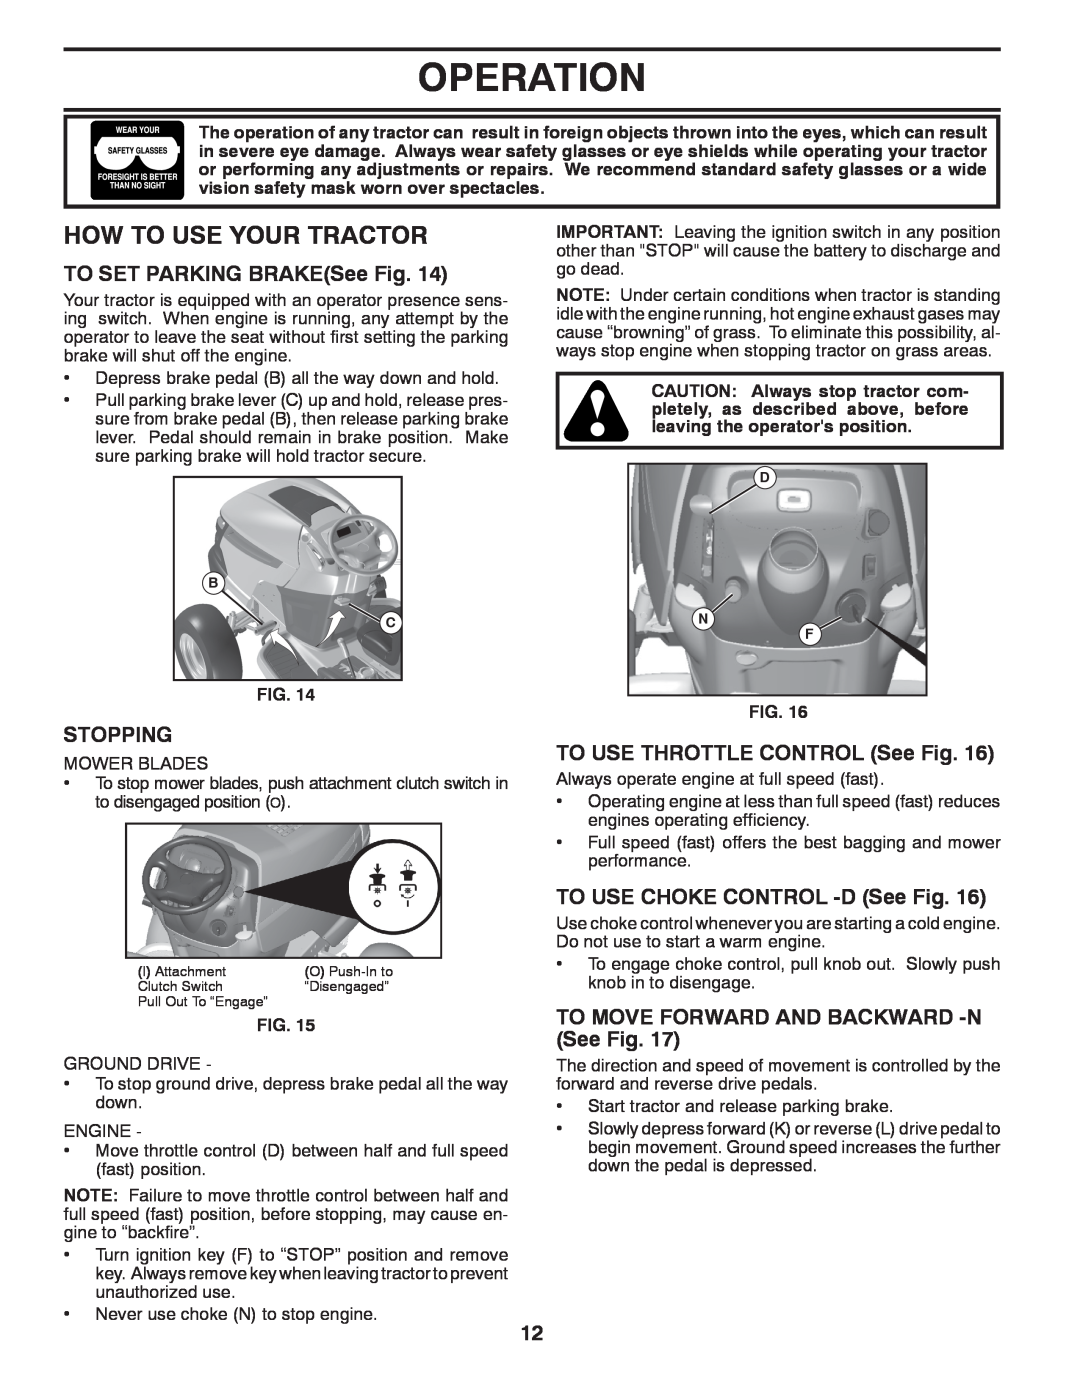 Poulan PBGT26H54 manual How To Use Your Tractor, TO SET PARKING BRAKESee Fig, Stopping, TO USE THROTTLE CONTROL See Fig 